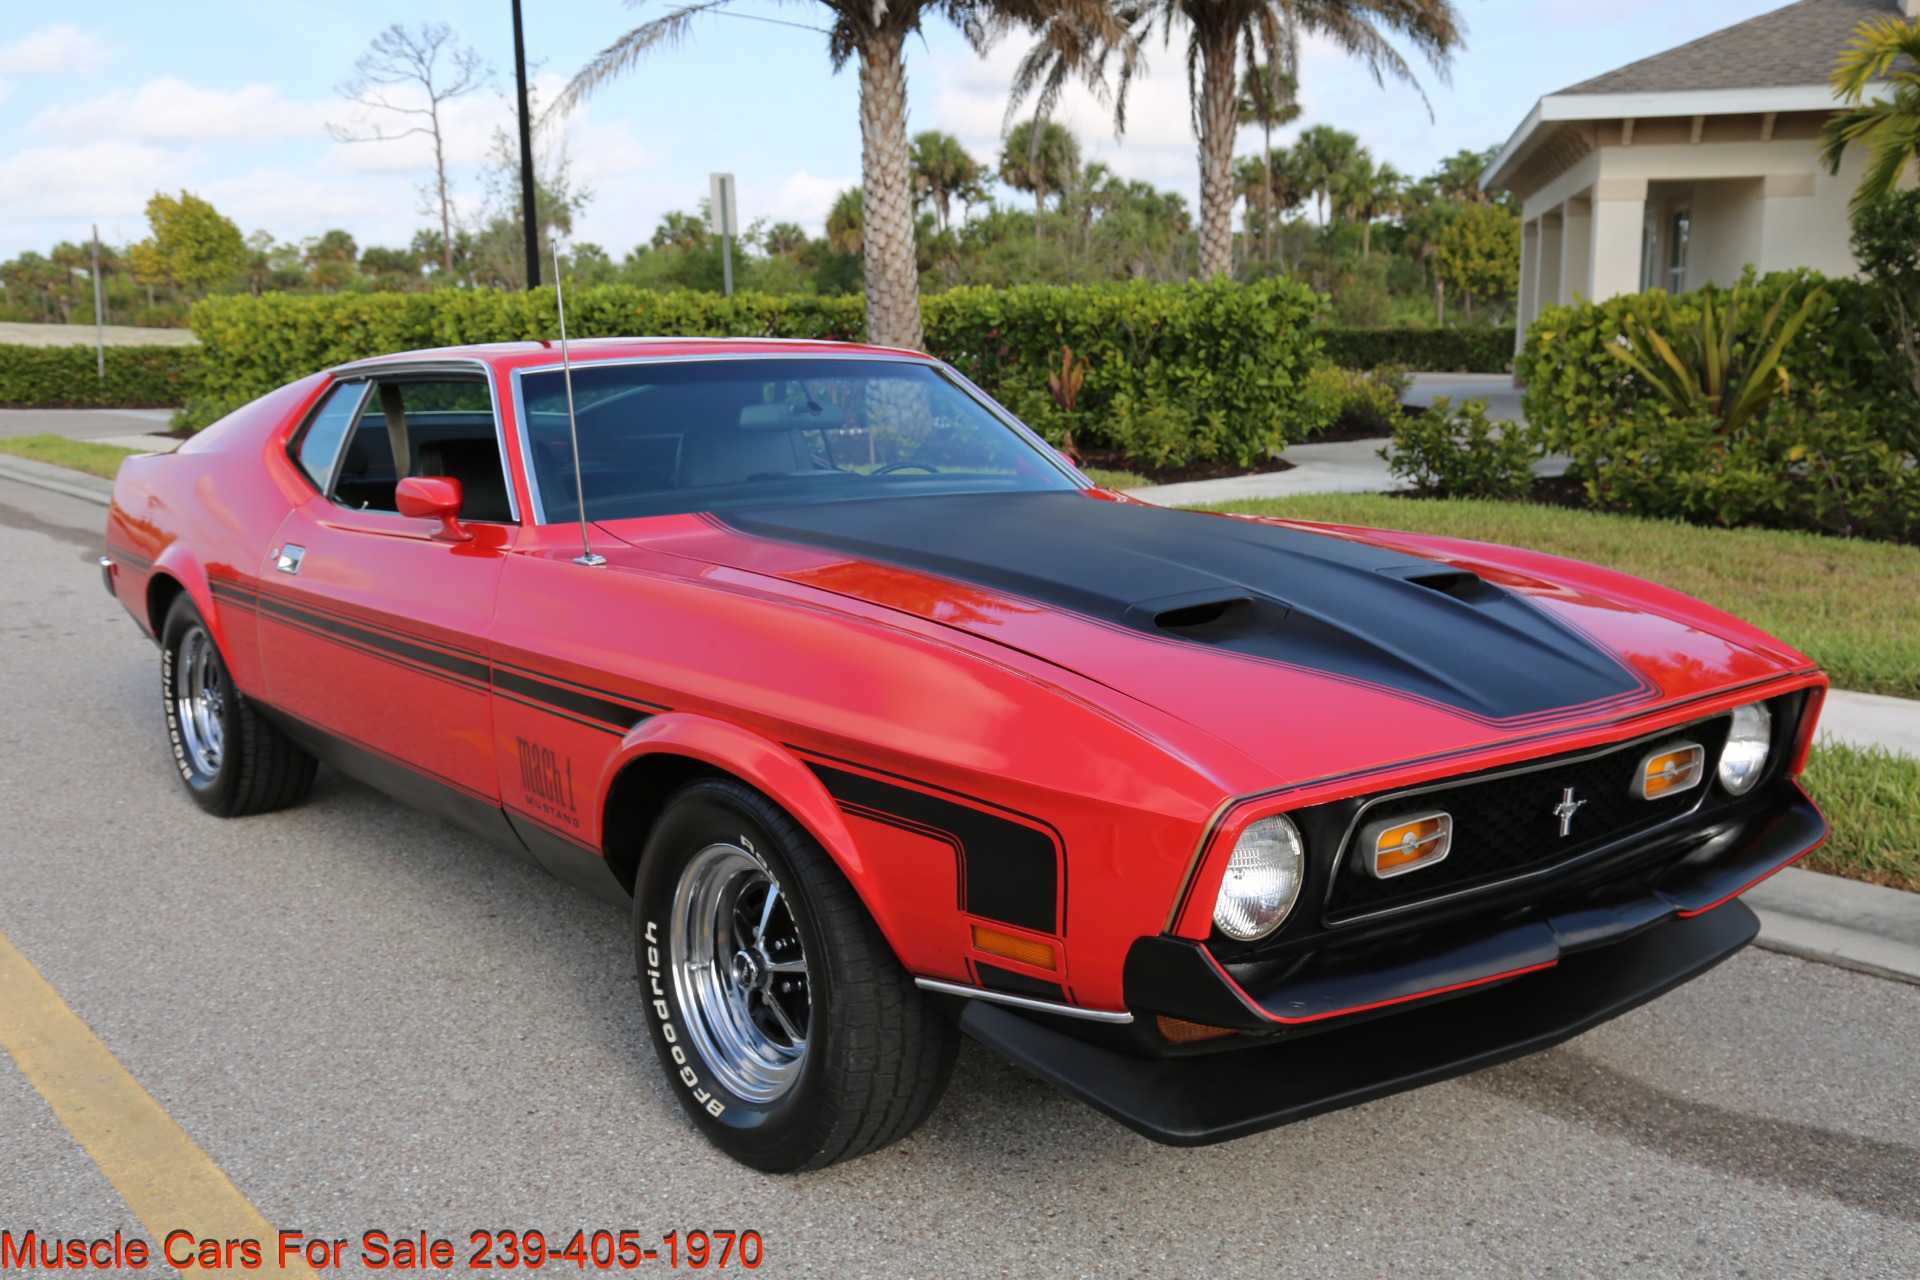 Used 1972 Ford Mustang Mach 1 Mach 1 For Sale ($26,500) | Muscle Cars ...